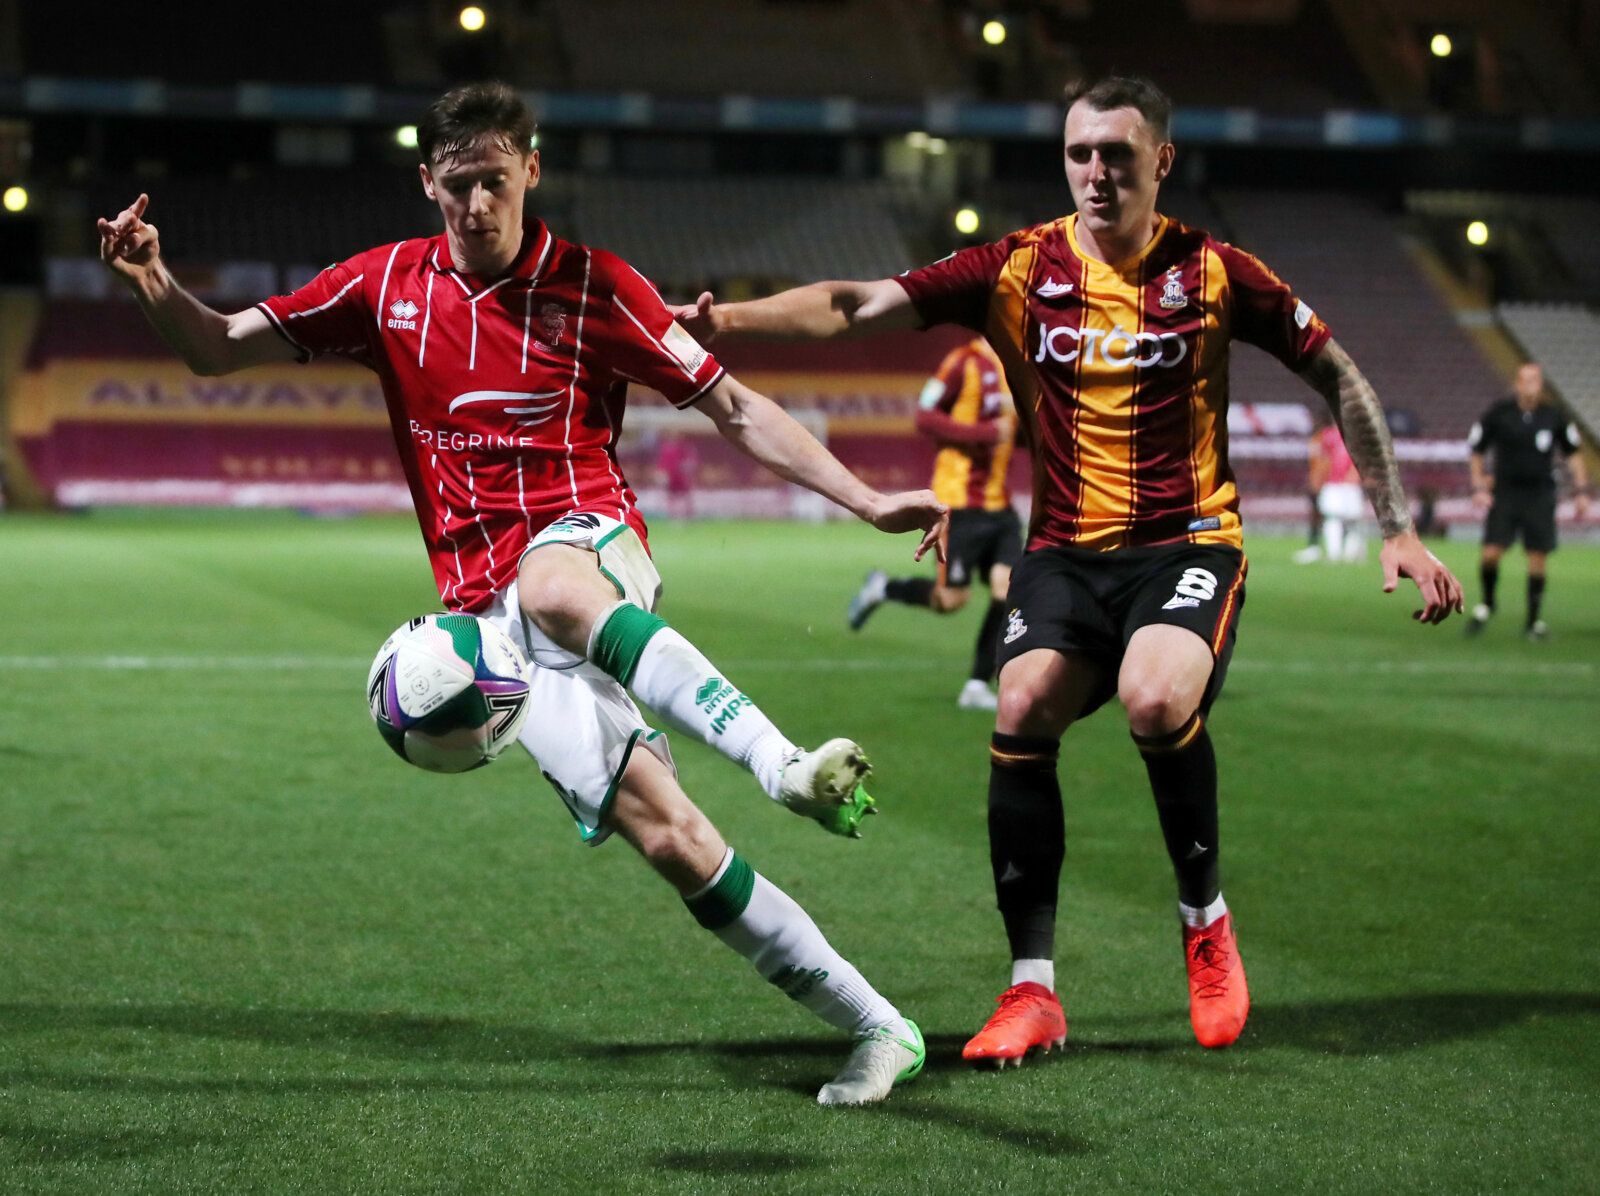 Soccer Football - Carabao Cup Second Round - Bradford City v Lincoln City - Northern Commercials Stadium, Bradford, Britain - September 15, 2020   Lincoln City's Conor McGrandles in action with Bradford City's Callum Cooke   Action Images/Molly Darlington    EDITORIAL USE ONLY. No use with unauthorized audio, video, data, fixture lists, club/league logos or 